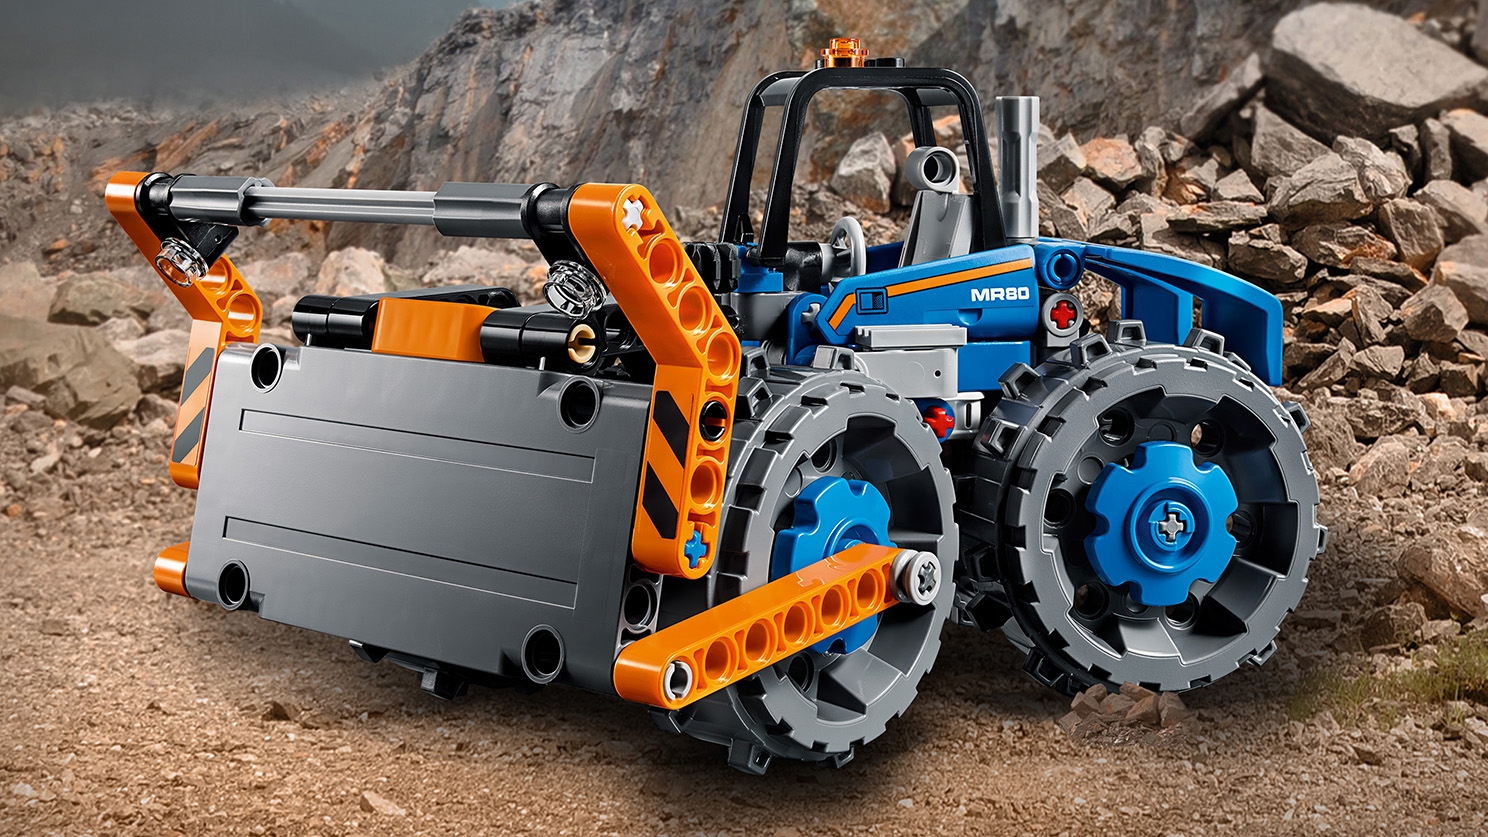 LEGO Technic - 42071 Dozer Compactor - Experience power in design with this vehicle, featuring a driver’s cab, huge blade and massive compactor wheels.